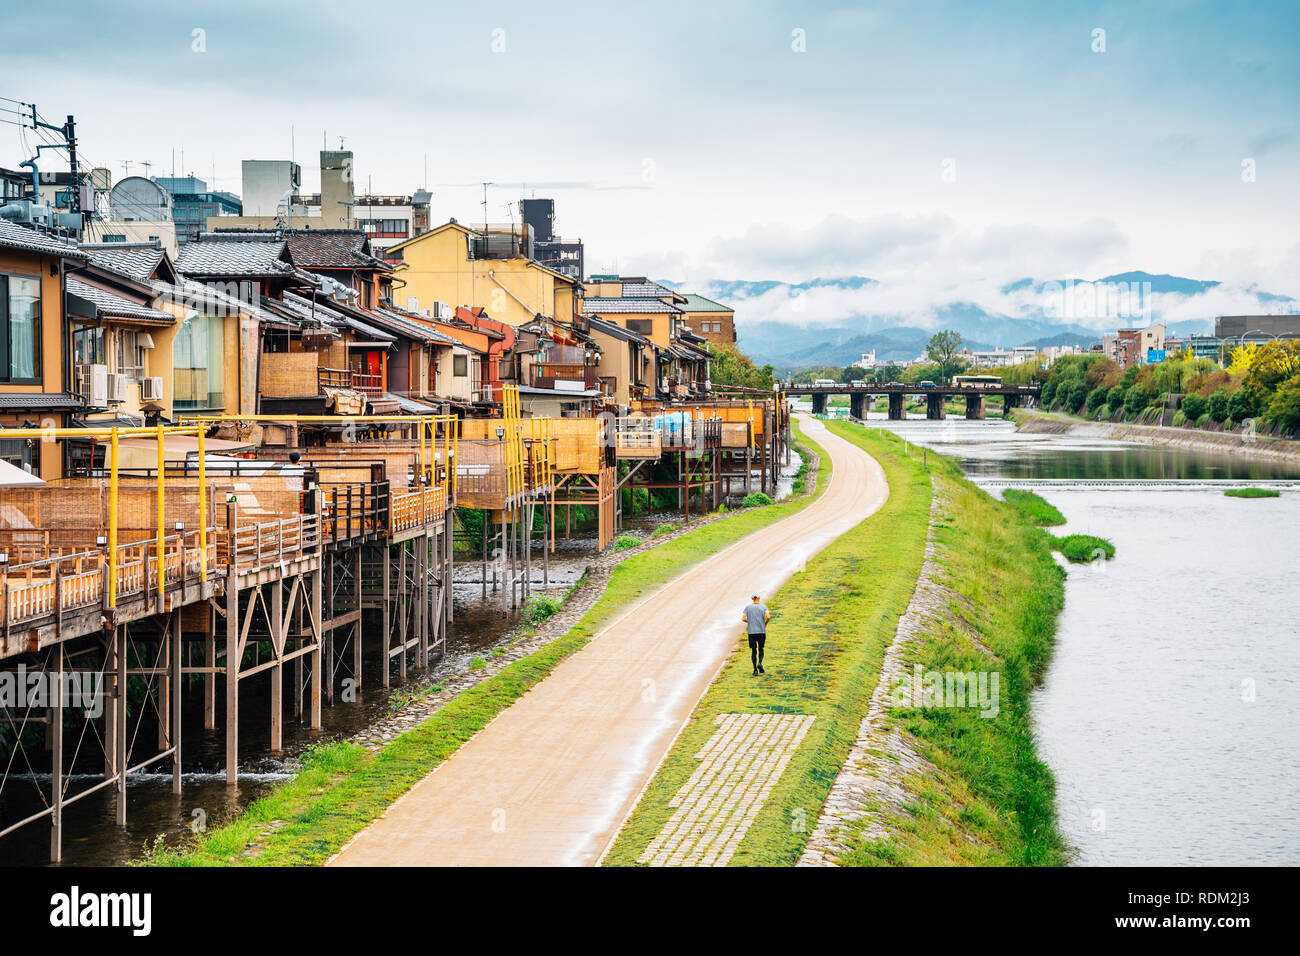 Pontocho old restaurant and Kamo river in Kyoto, Japan Stock Photo